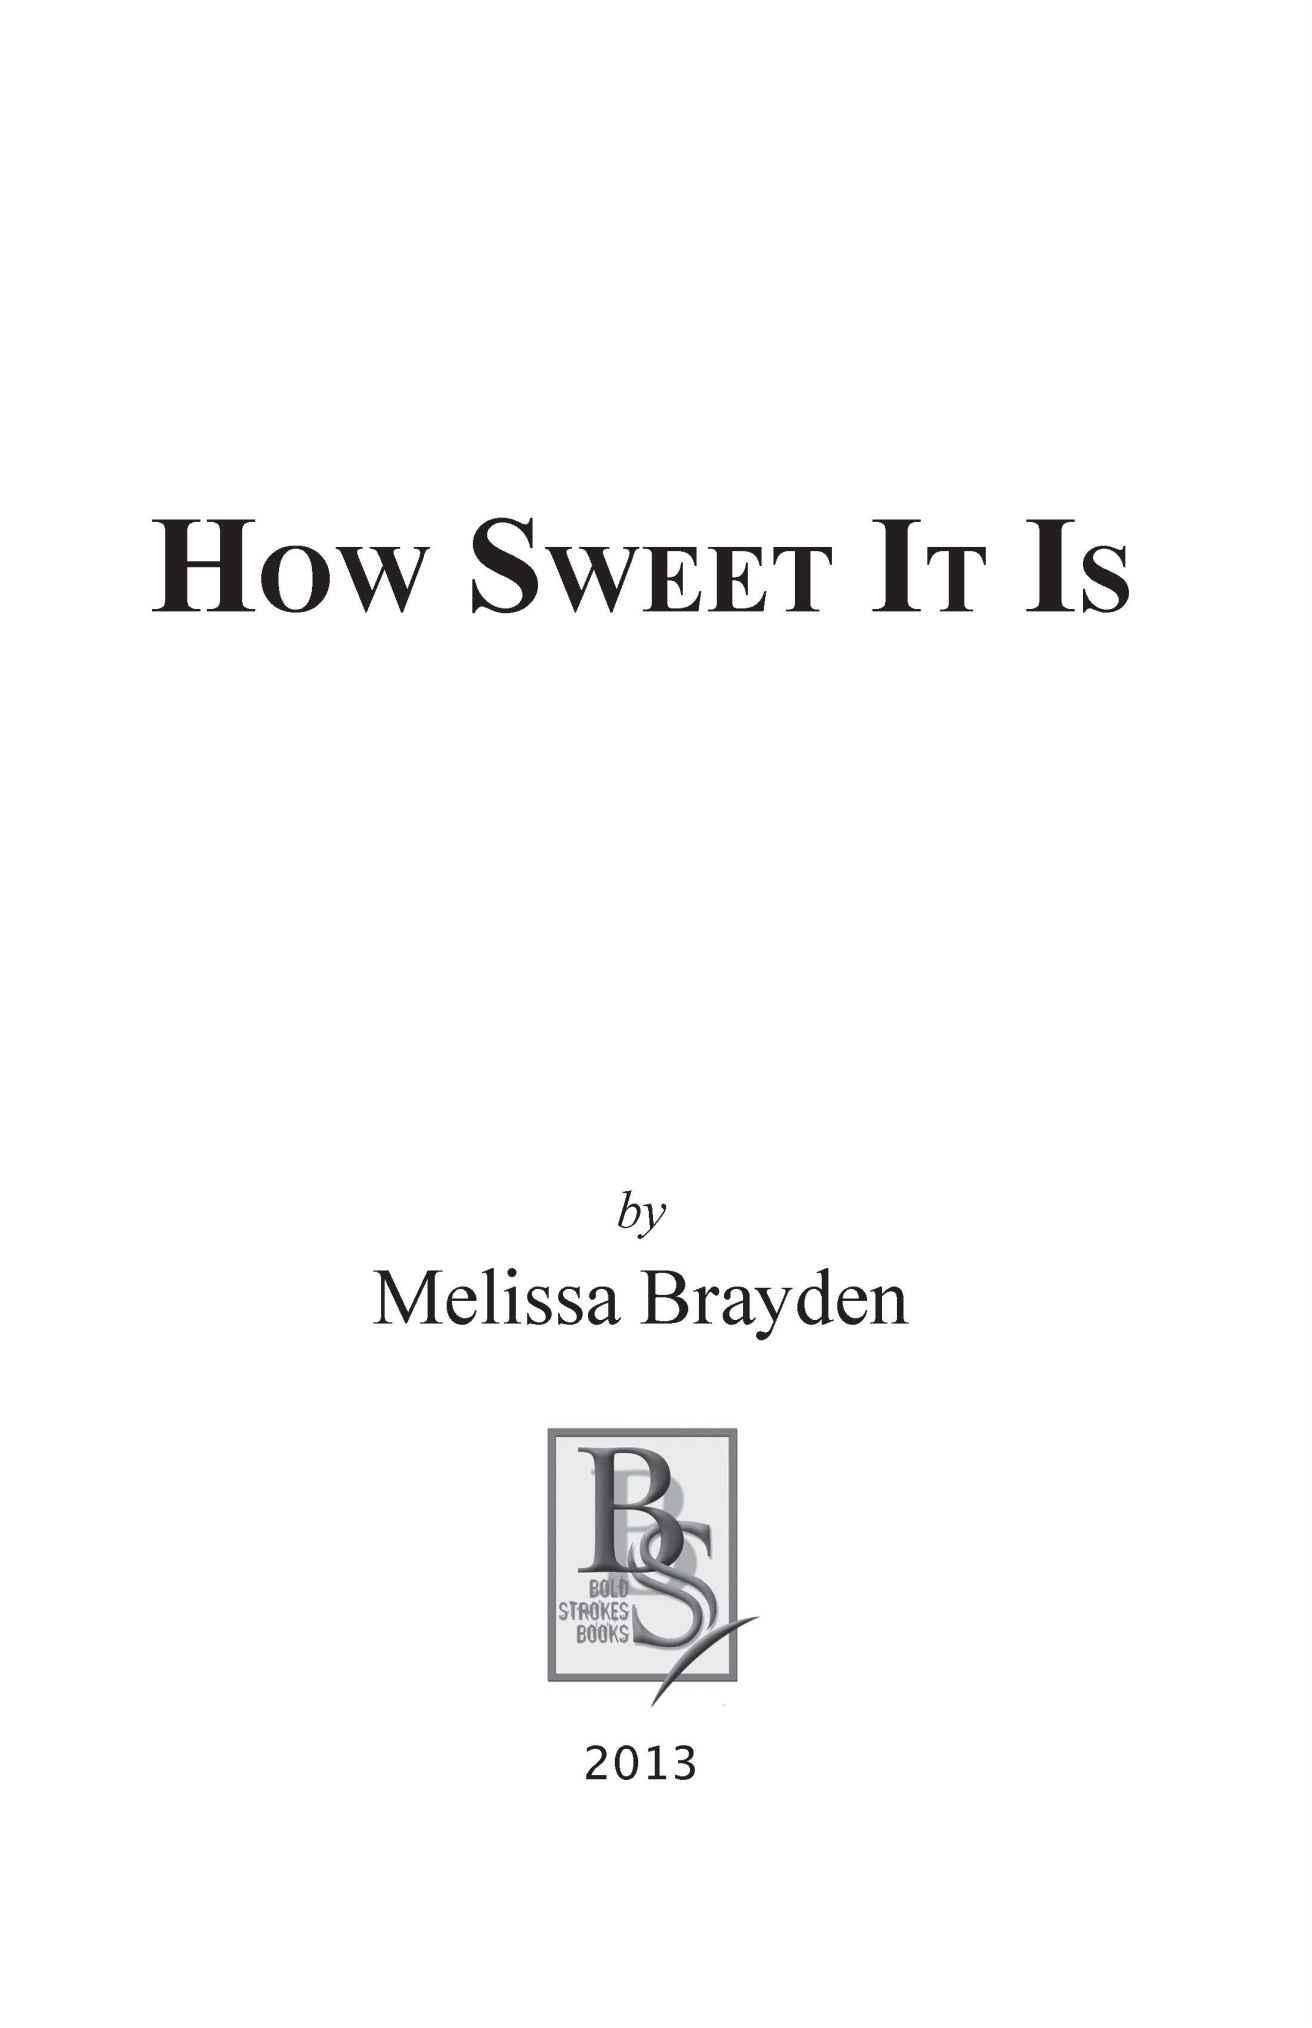 How Sweet It Is 2013 By Melissa Brayden All Rights Reserved ISBN 13 - фото 5